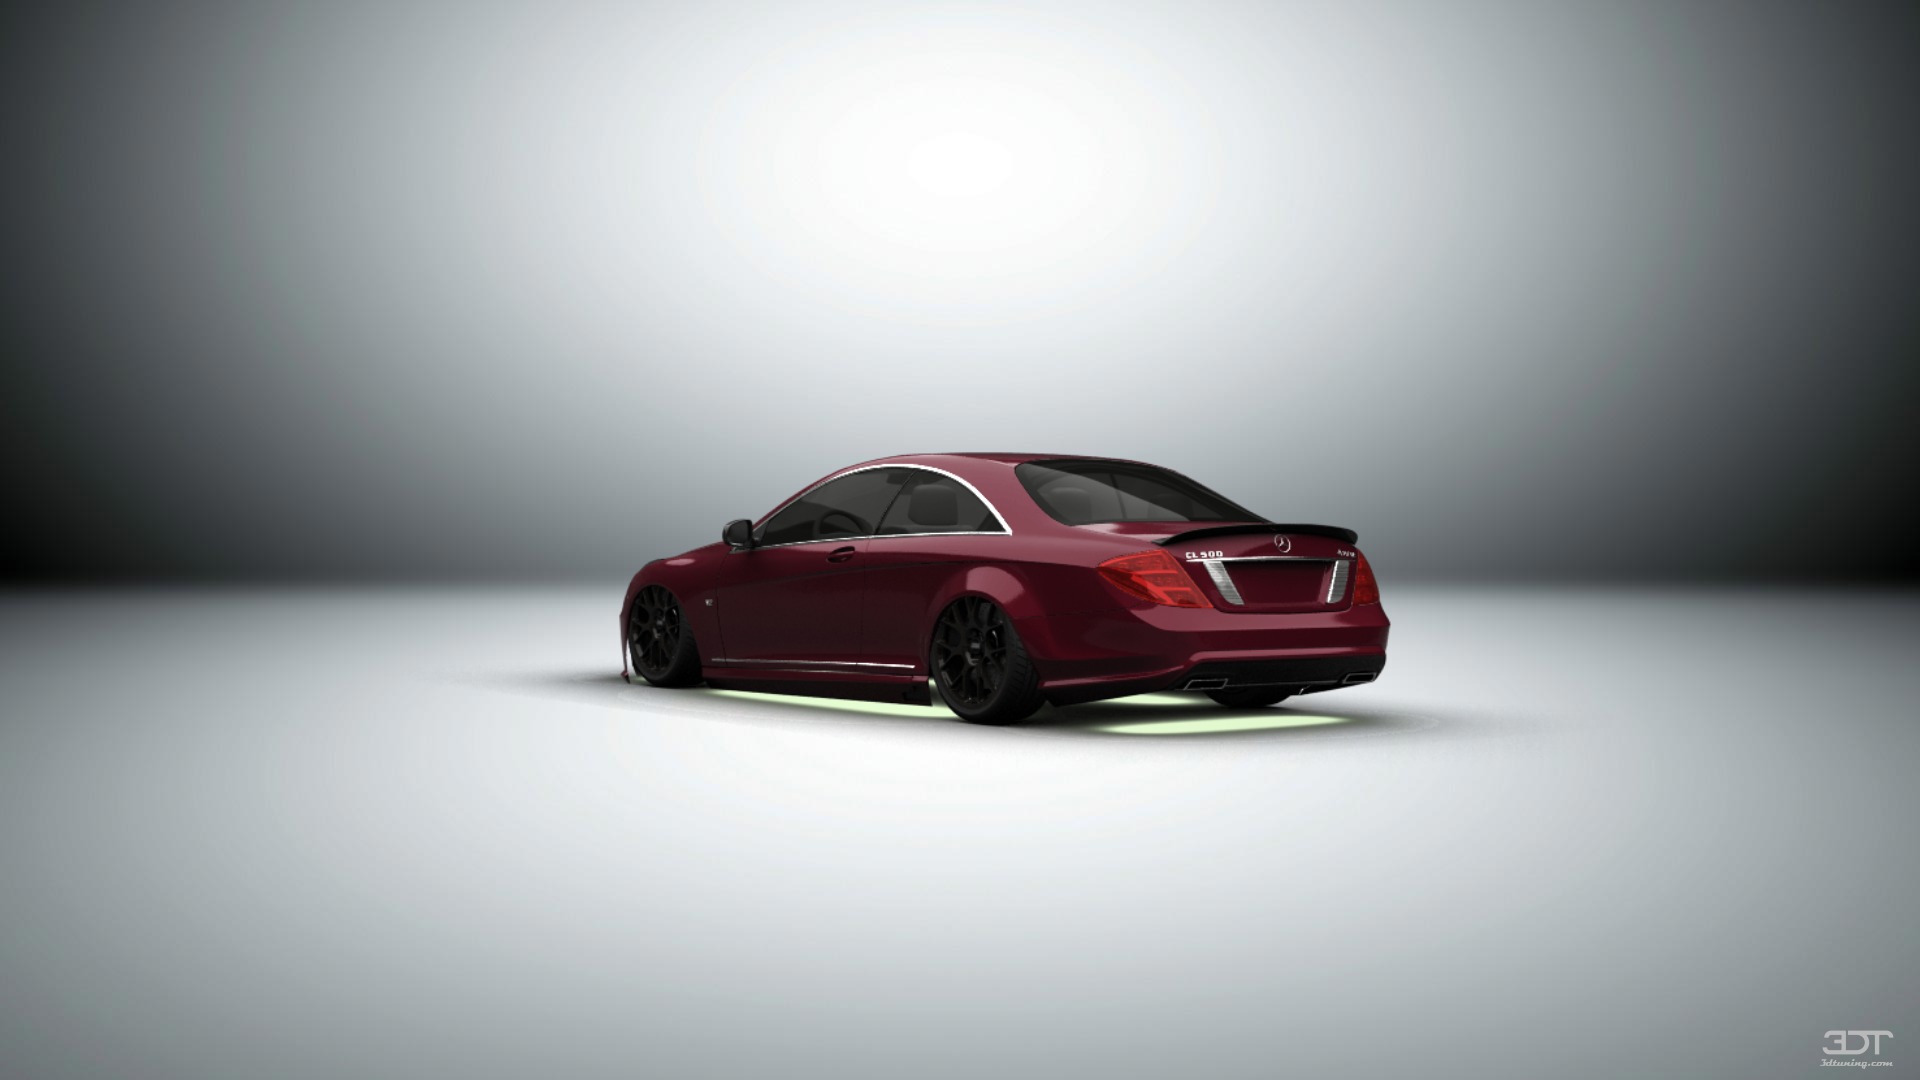 Mercedes CL class Coupe 2010 tuning